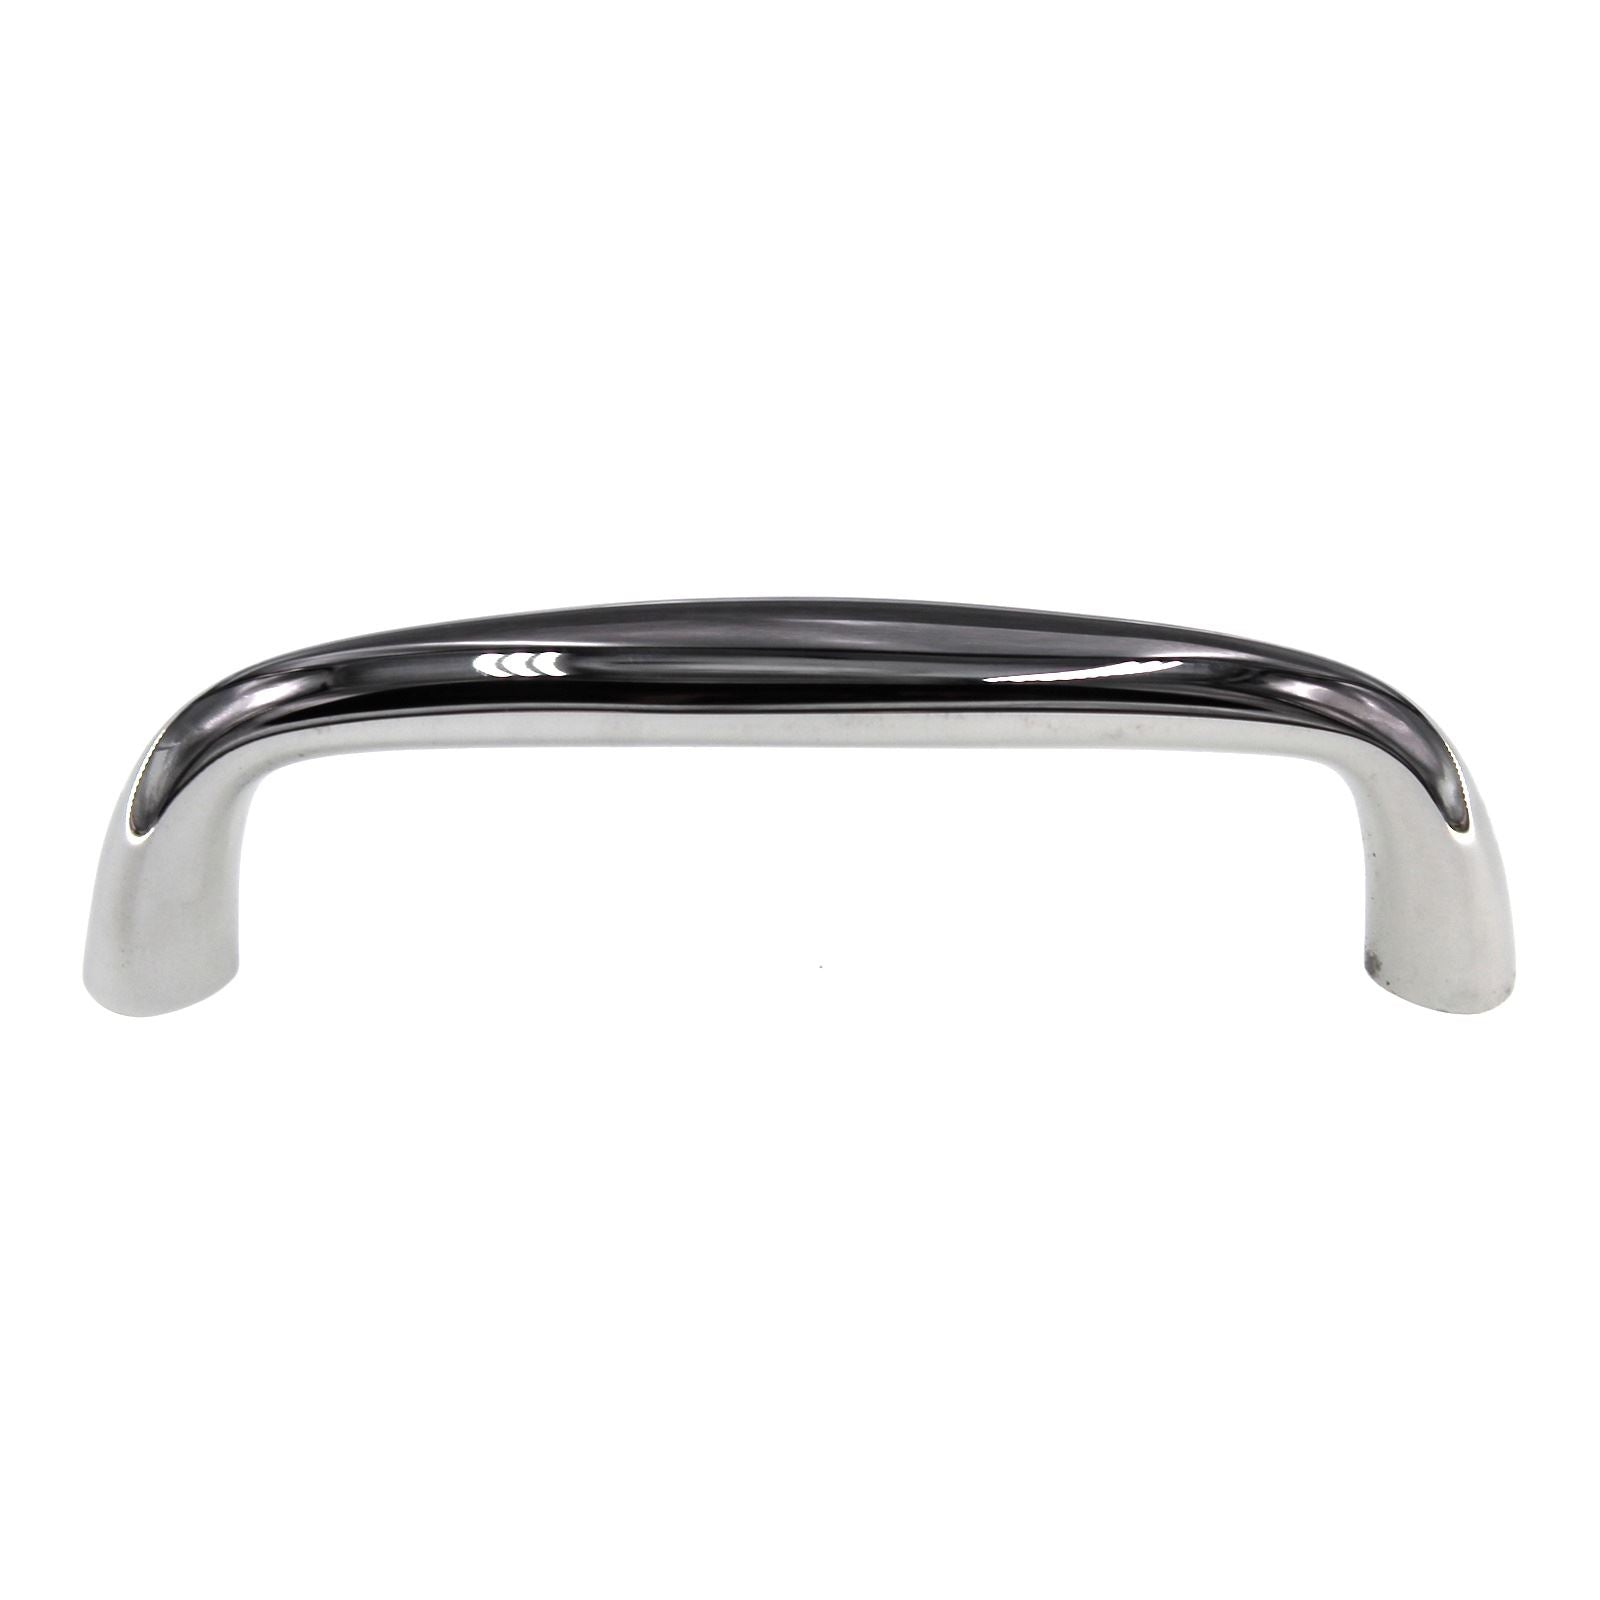 Schaub And Company Traditional Cabinet Arch Pull 3" Ctr Polished Chrome 721-26